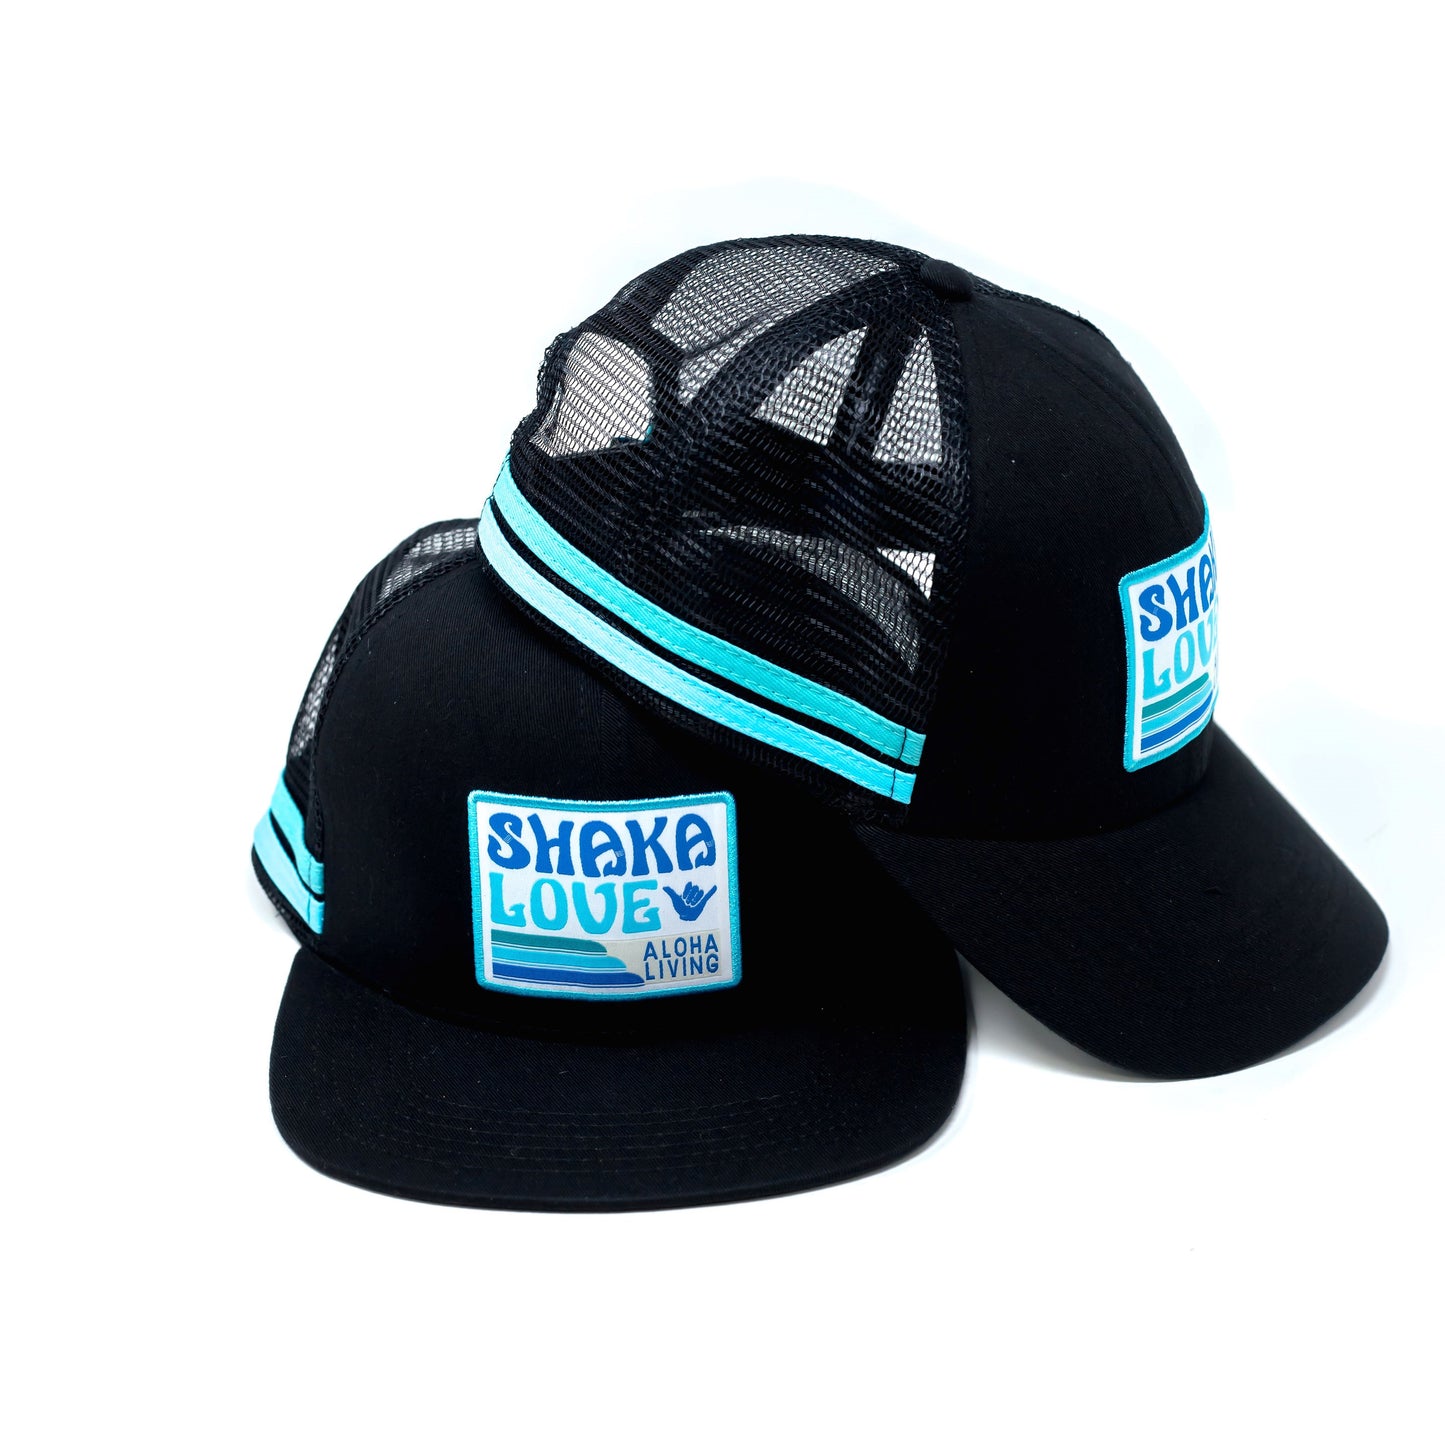 HAT Bundle Includes 2 Eco Surf Hats of Your Choice